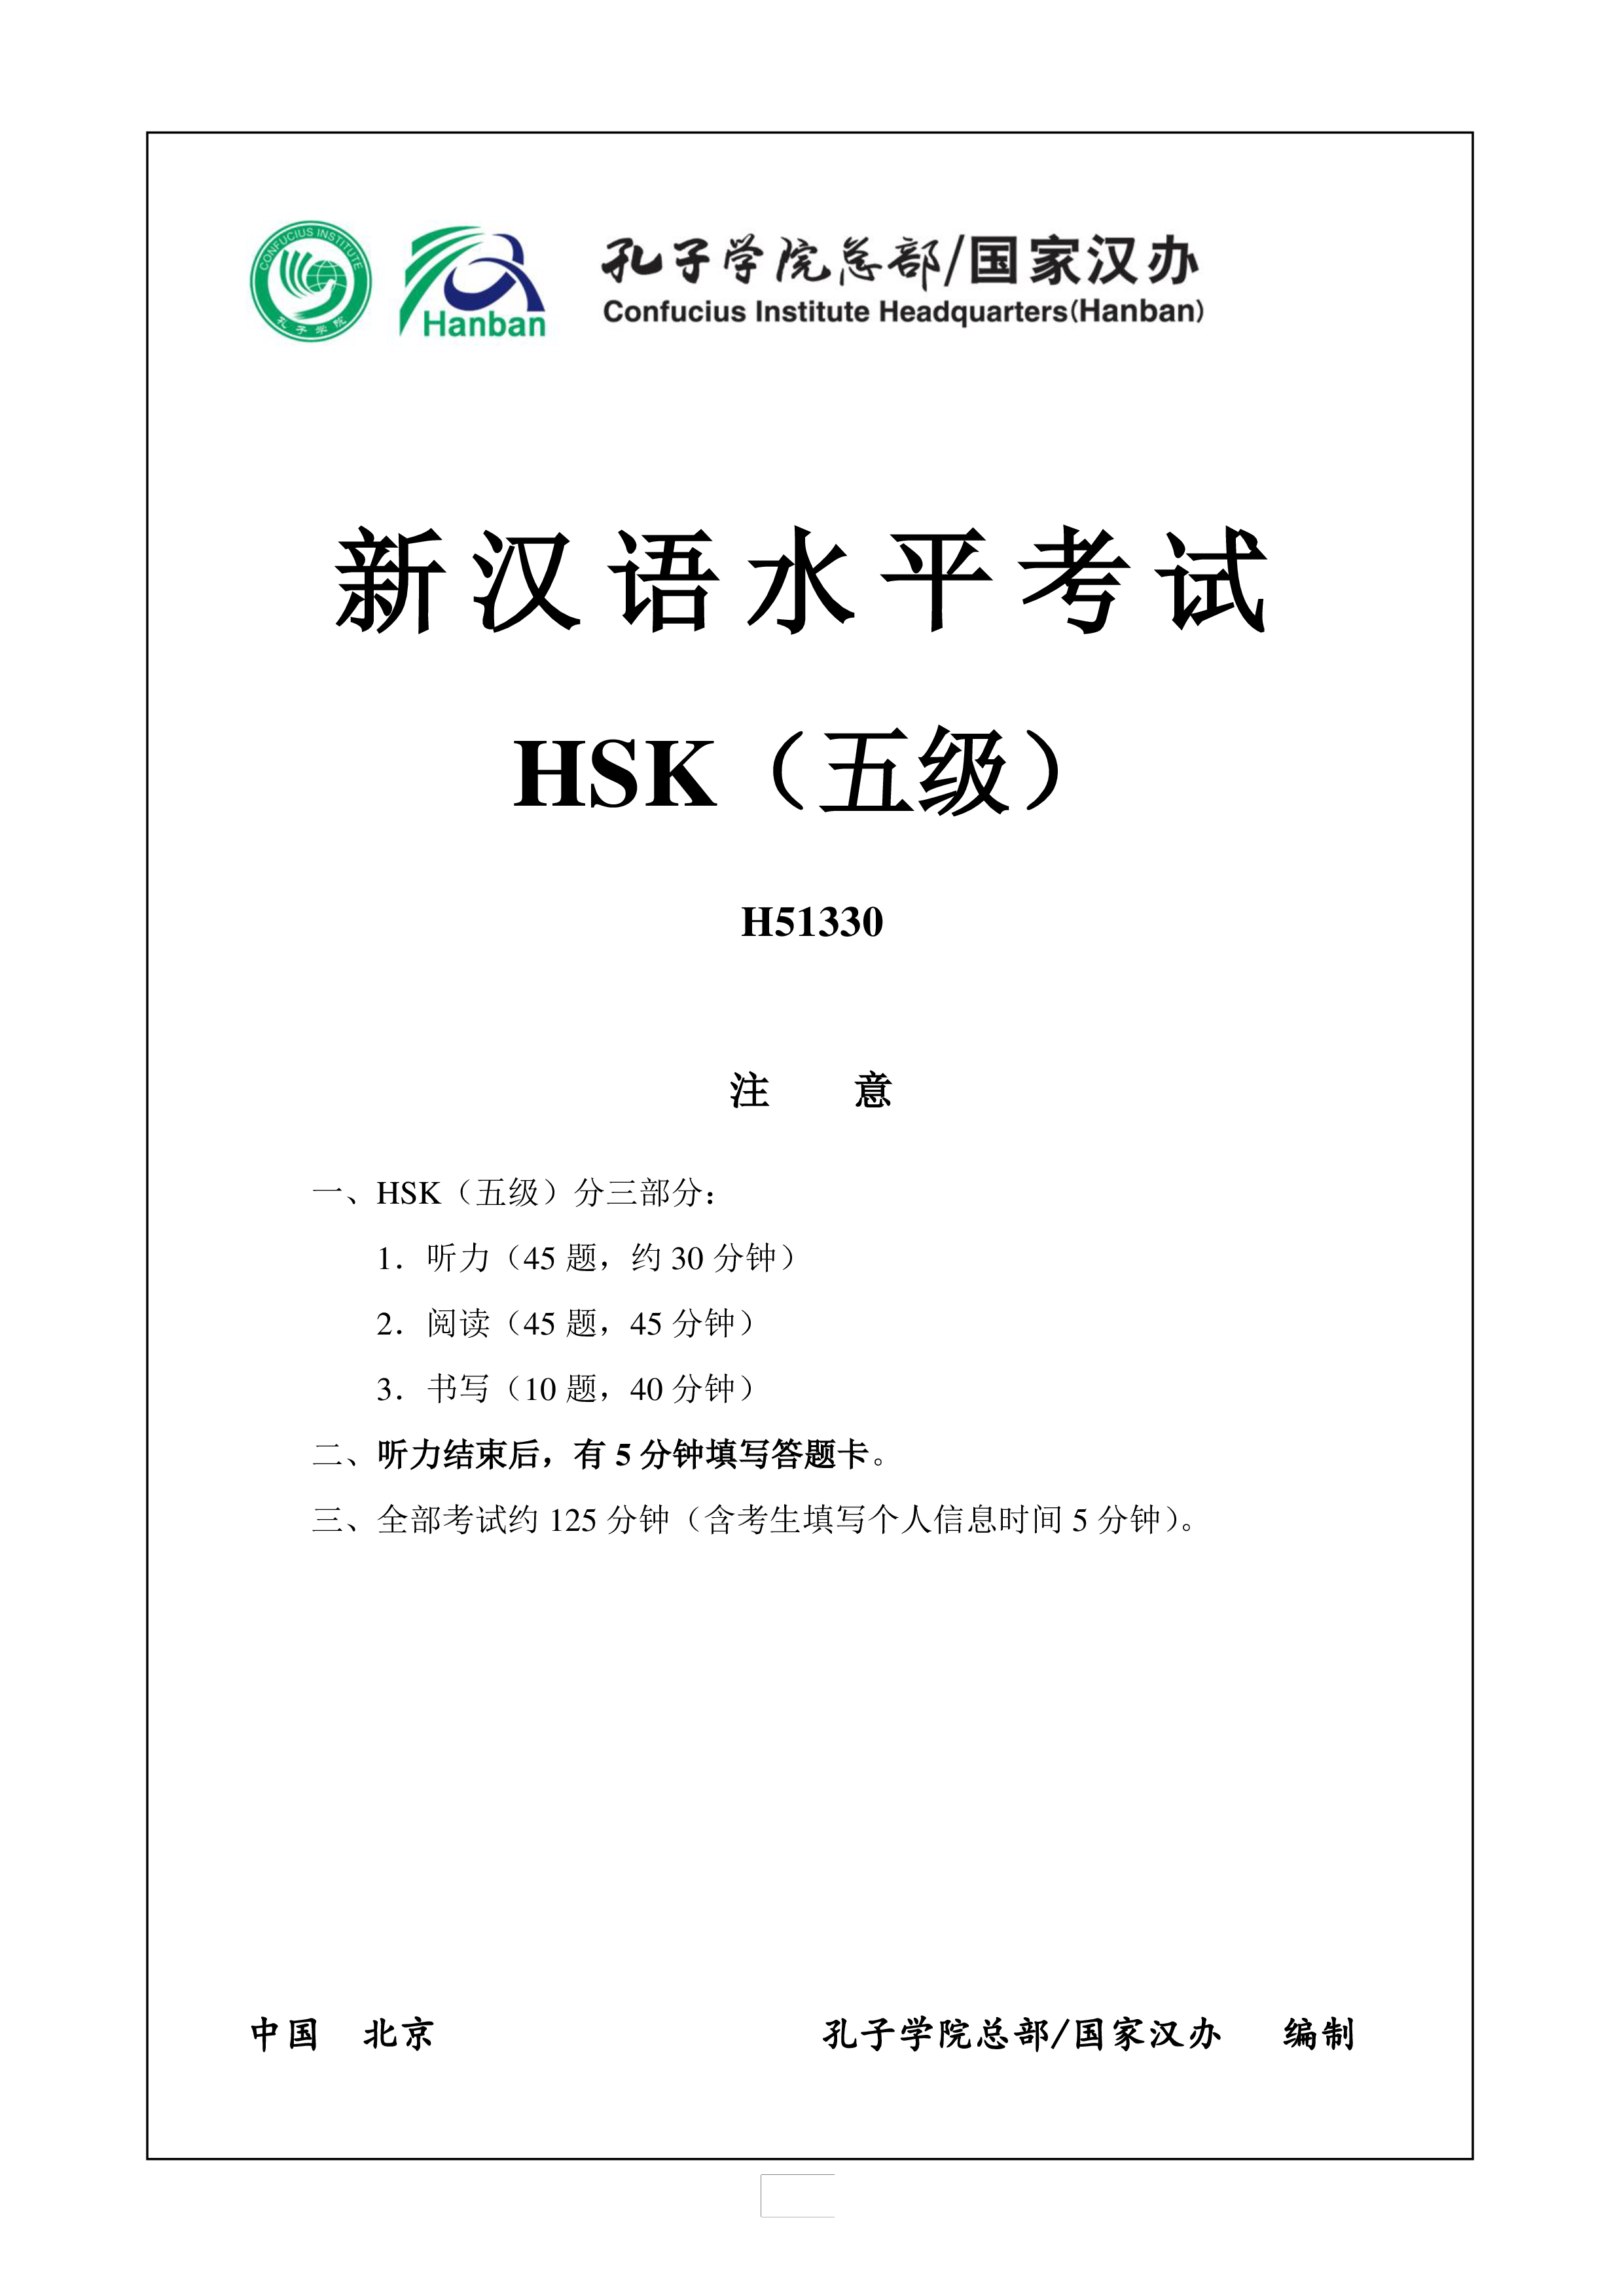 hsk5 chinese exam, incl audio and answer # h51330 voorbeeld afbeelding 